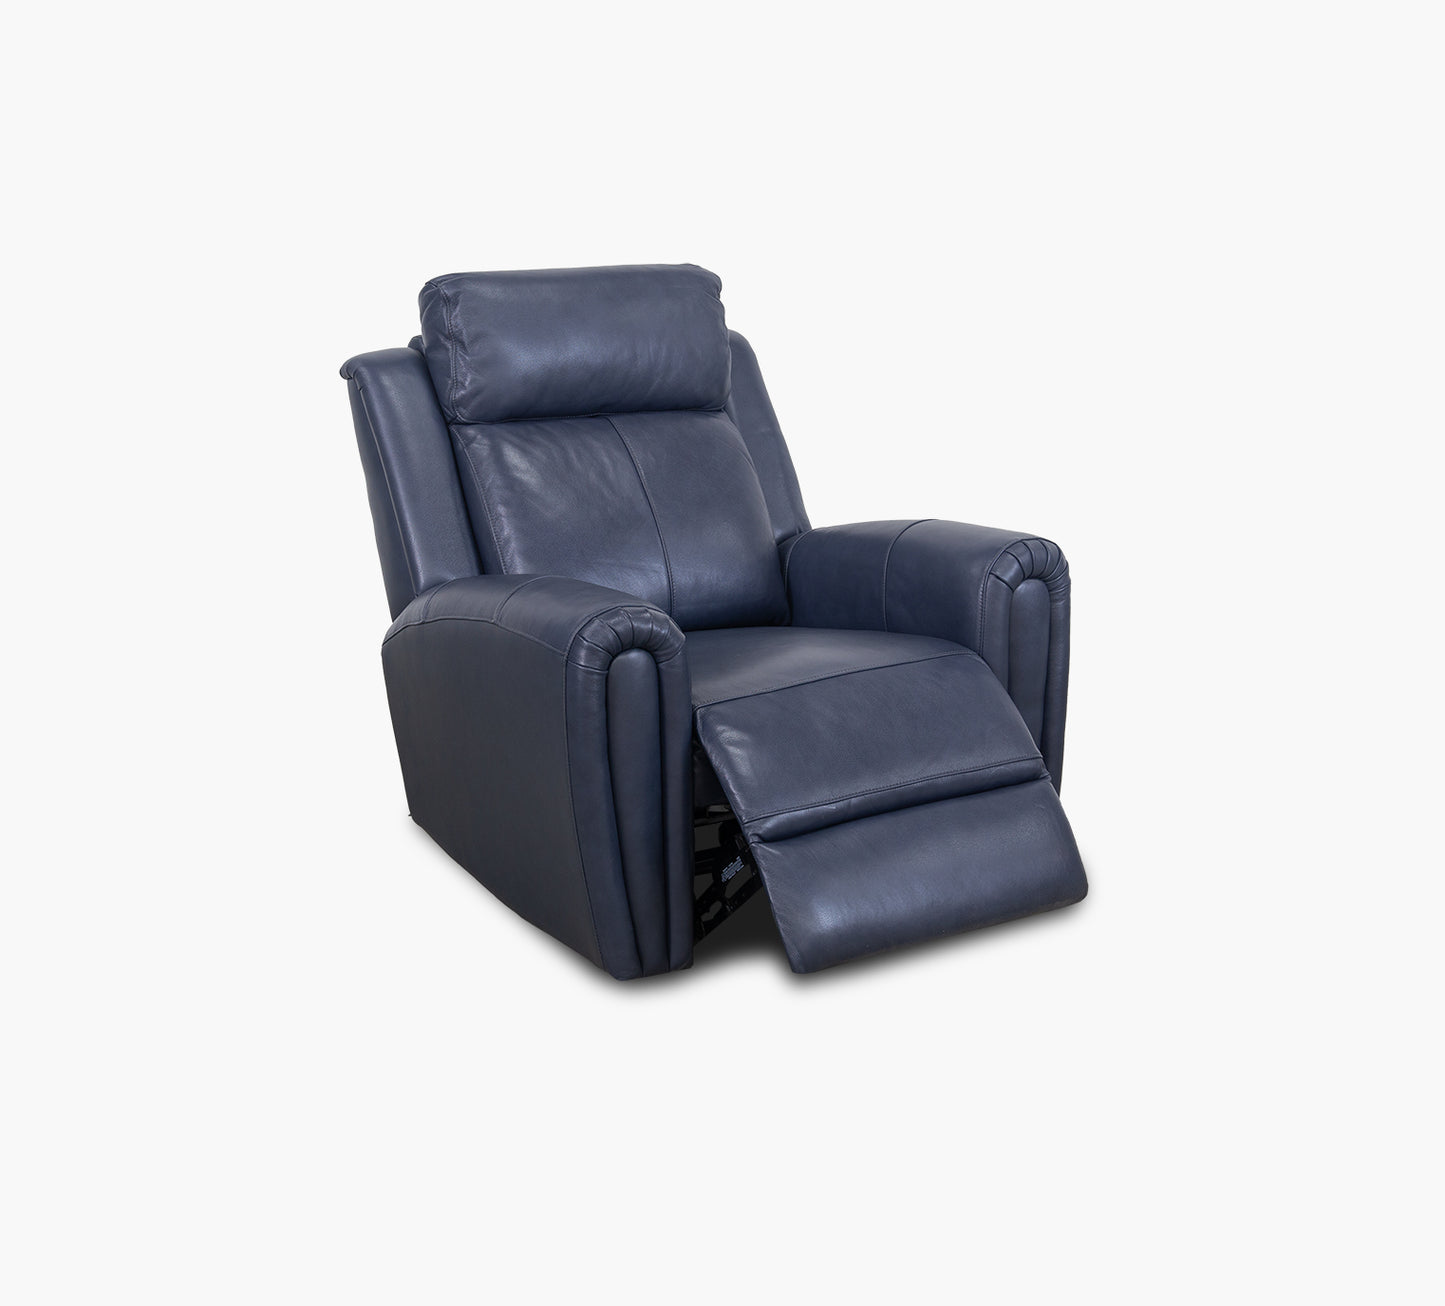 Jonathan Blue Leather Glider Recliner